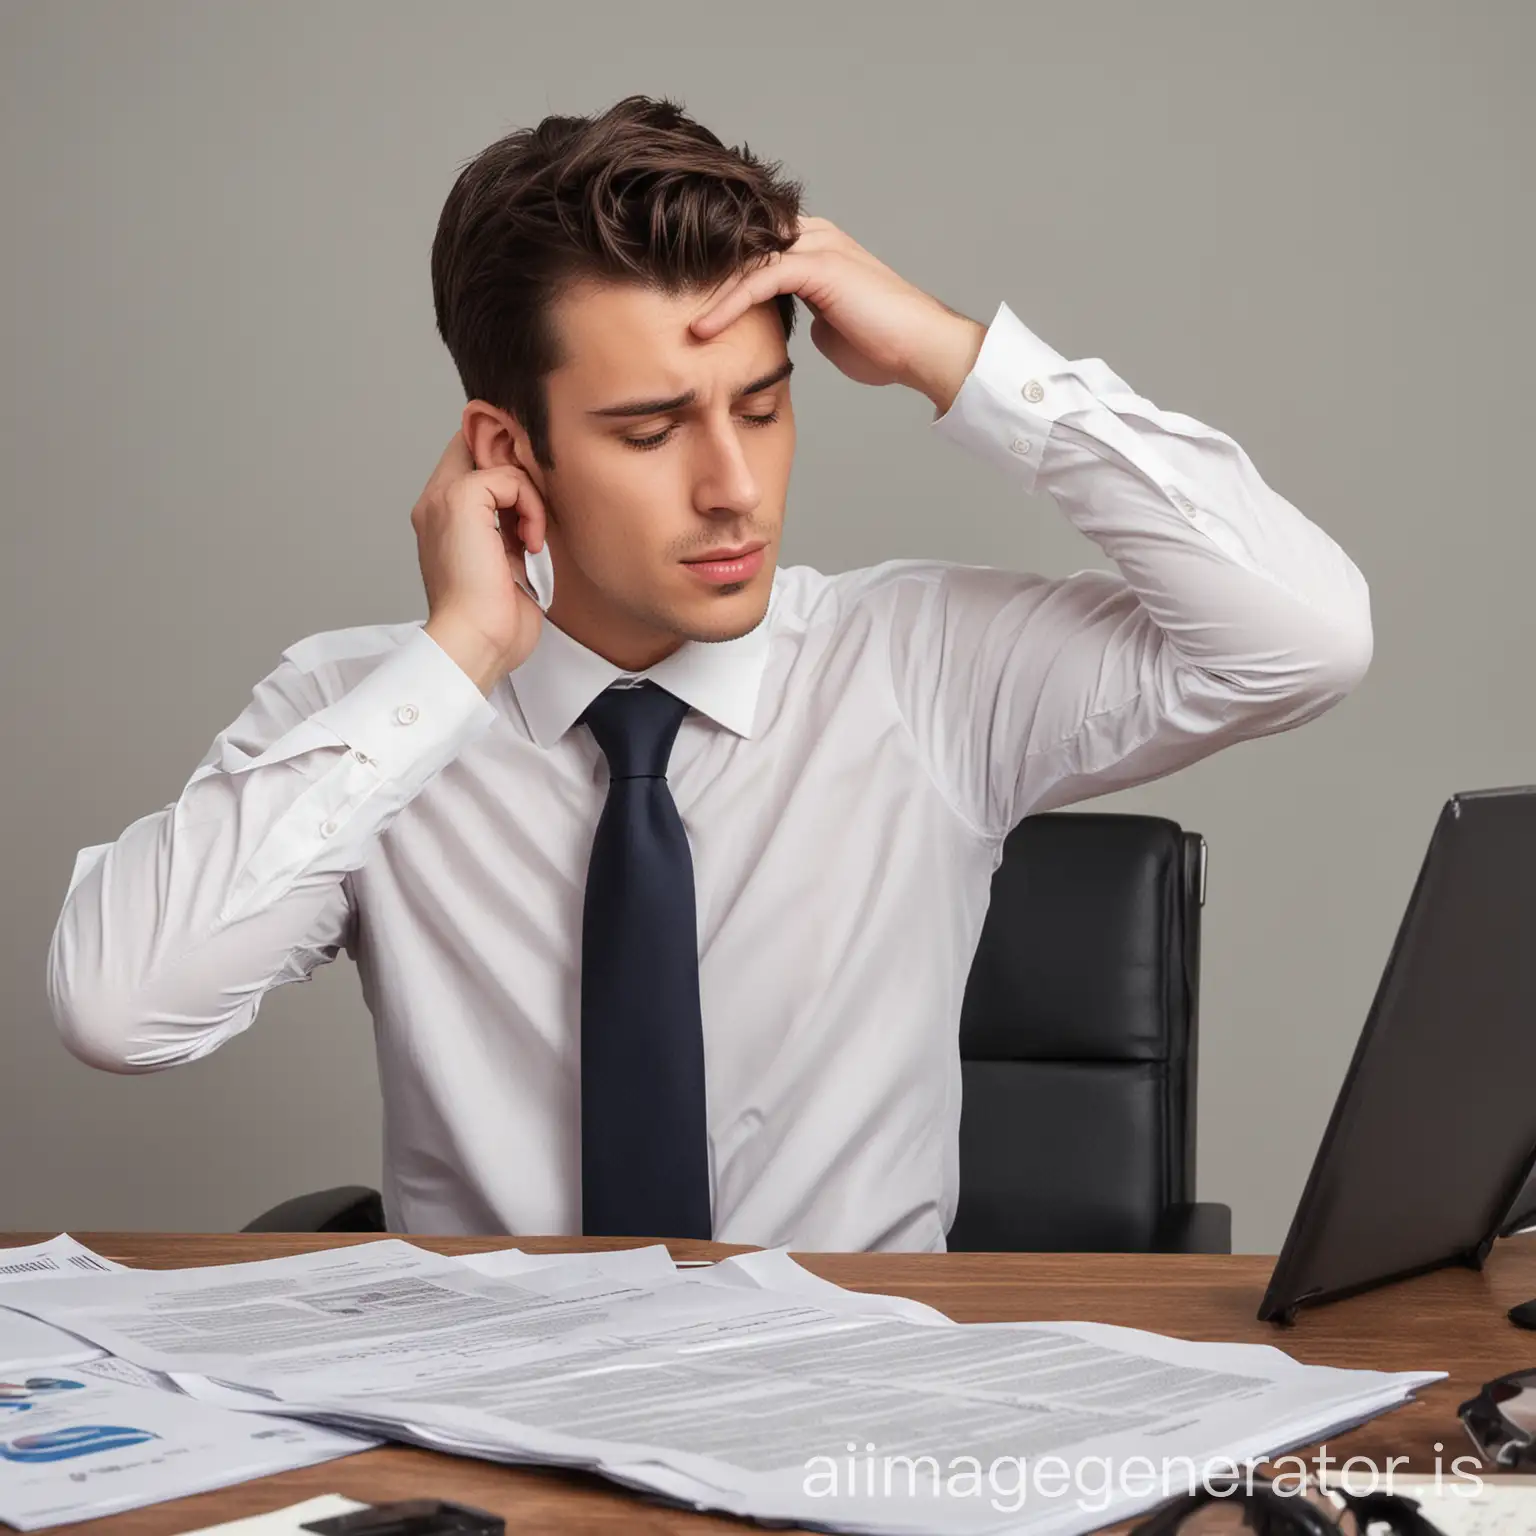 A young business man scratching his head while reviewing a thick document.
